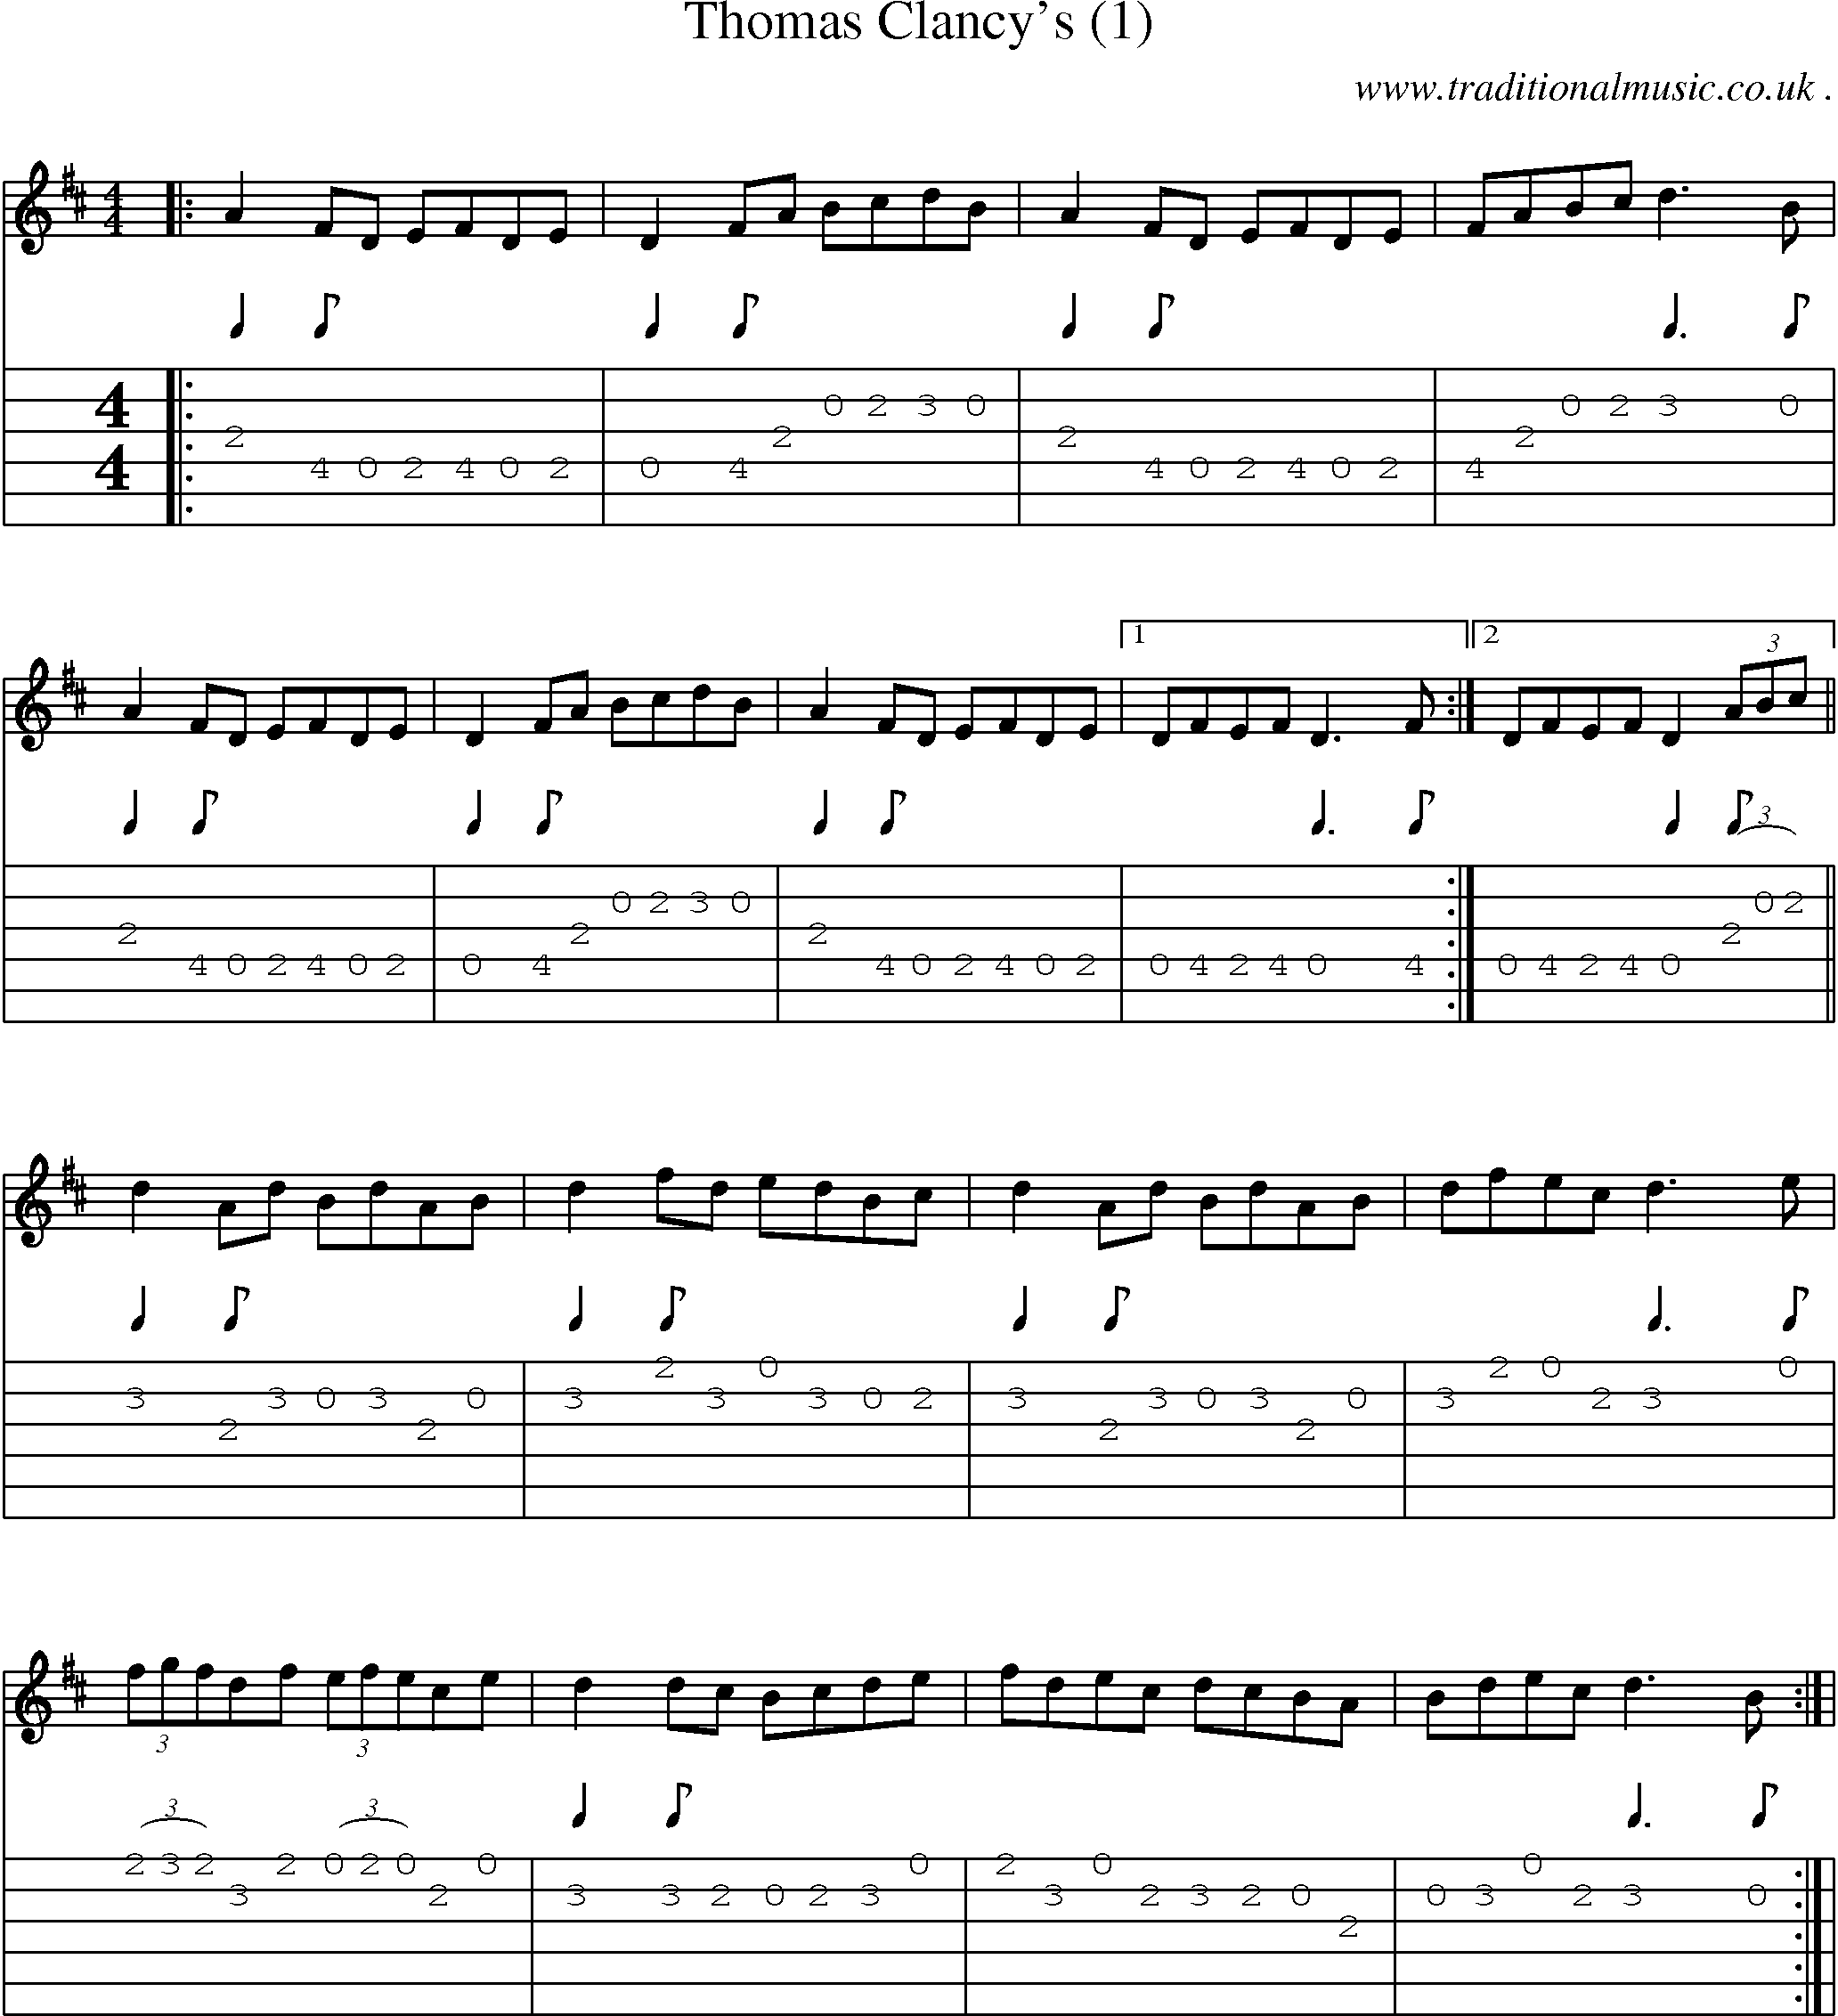 Sheet-Music and Guitar Tabs for Thomas Clancys (1)